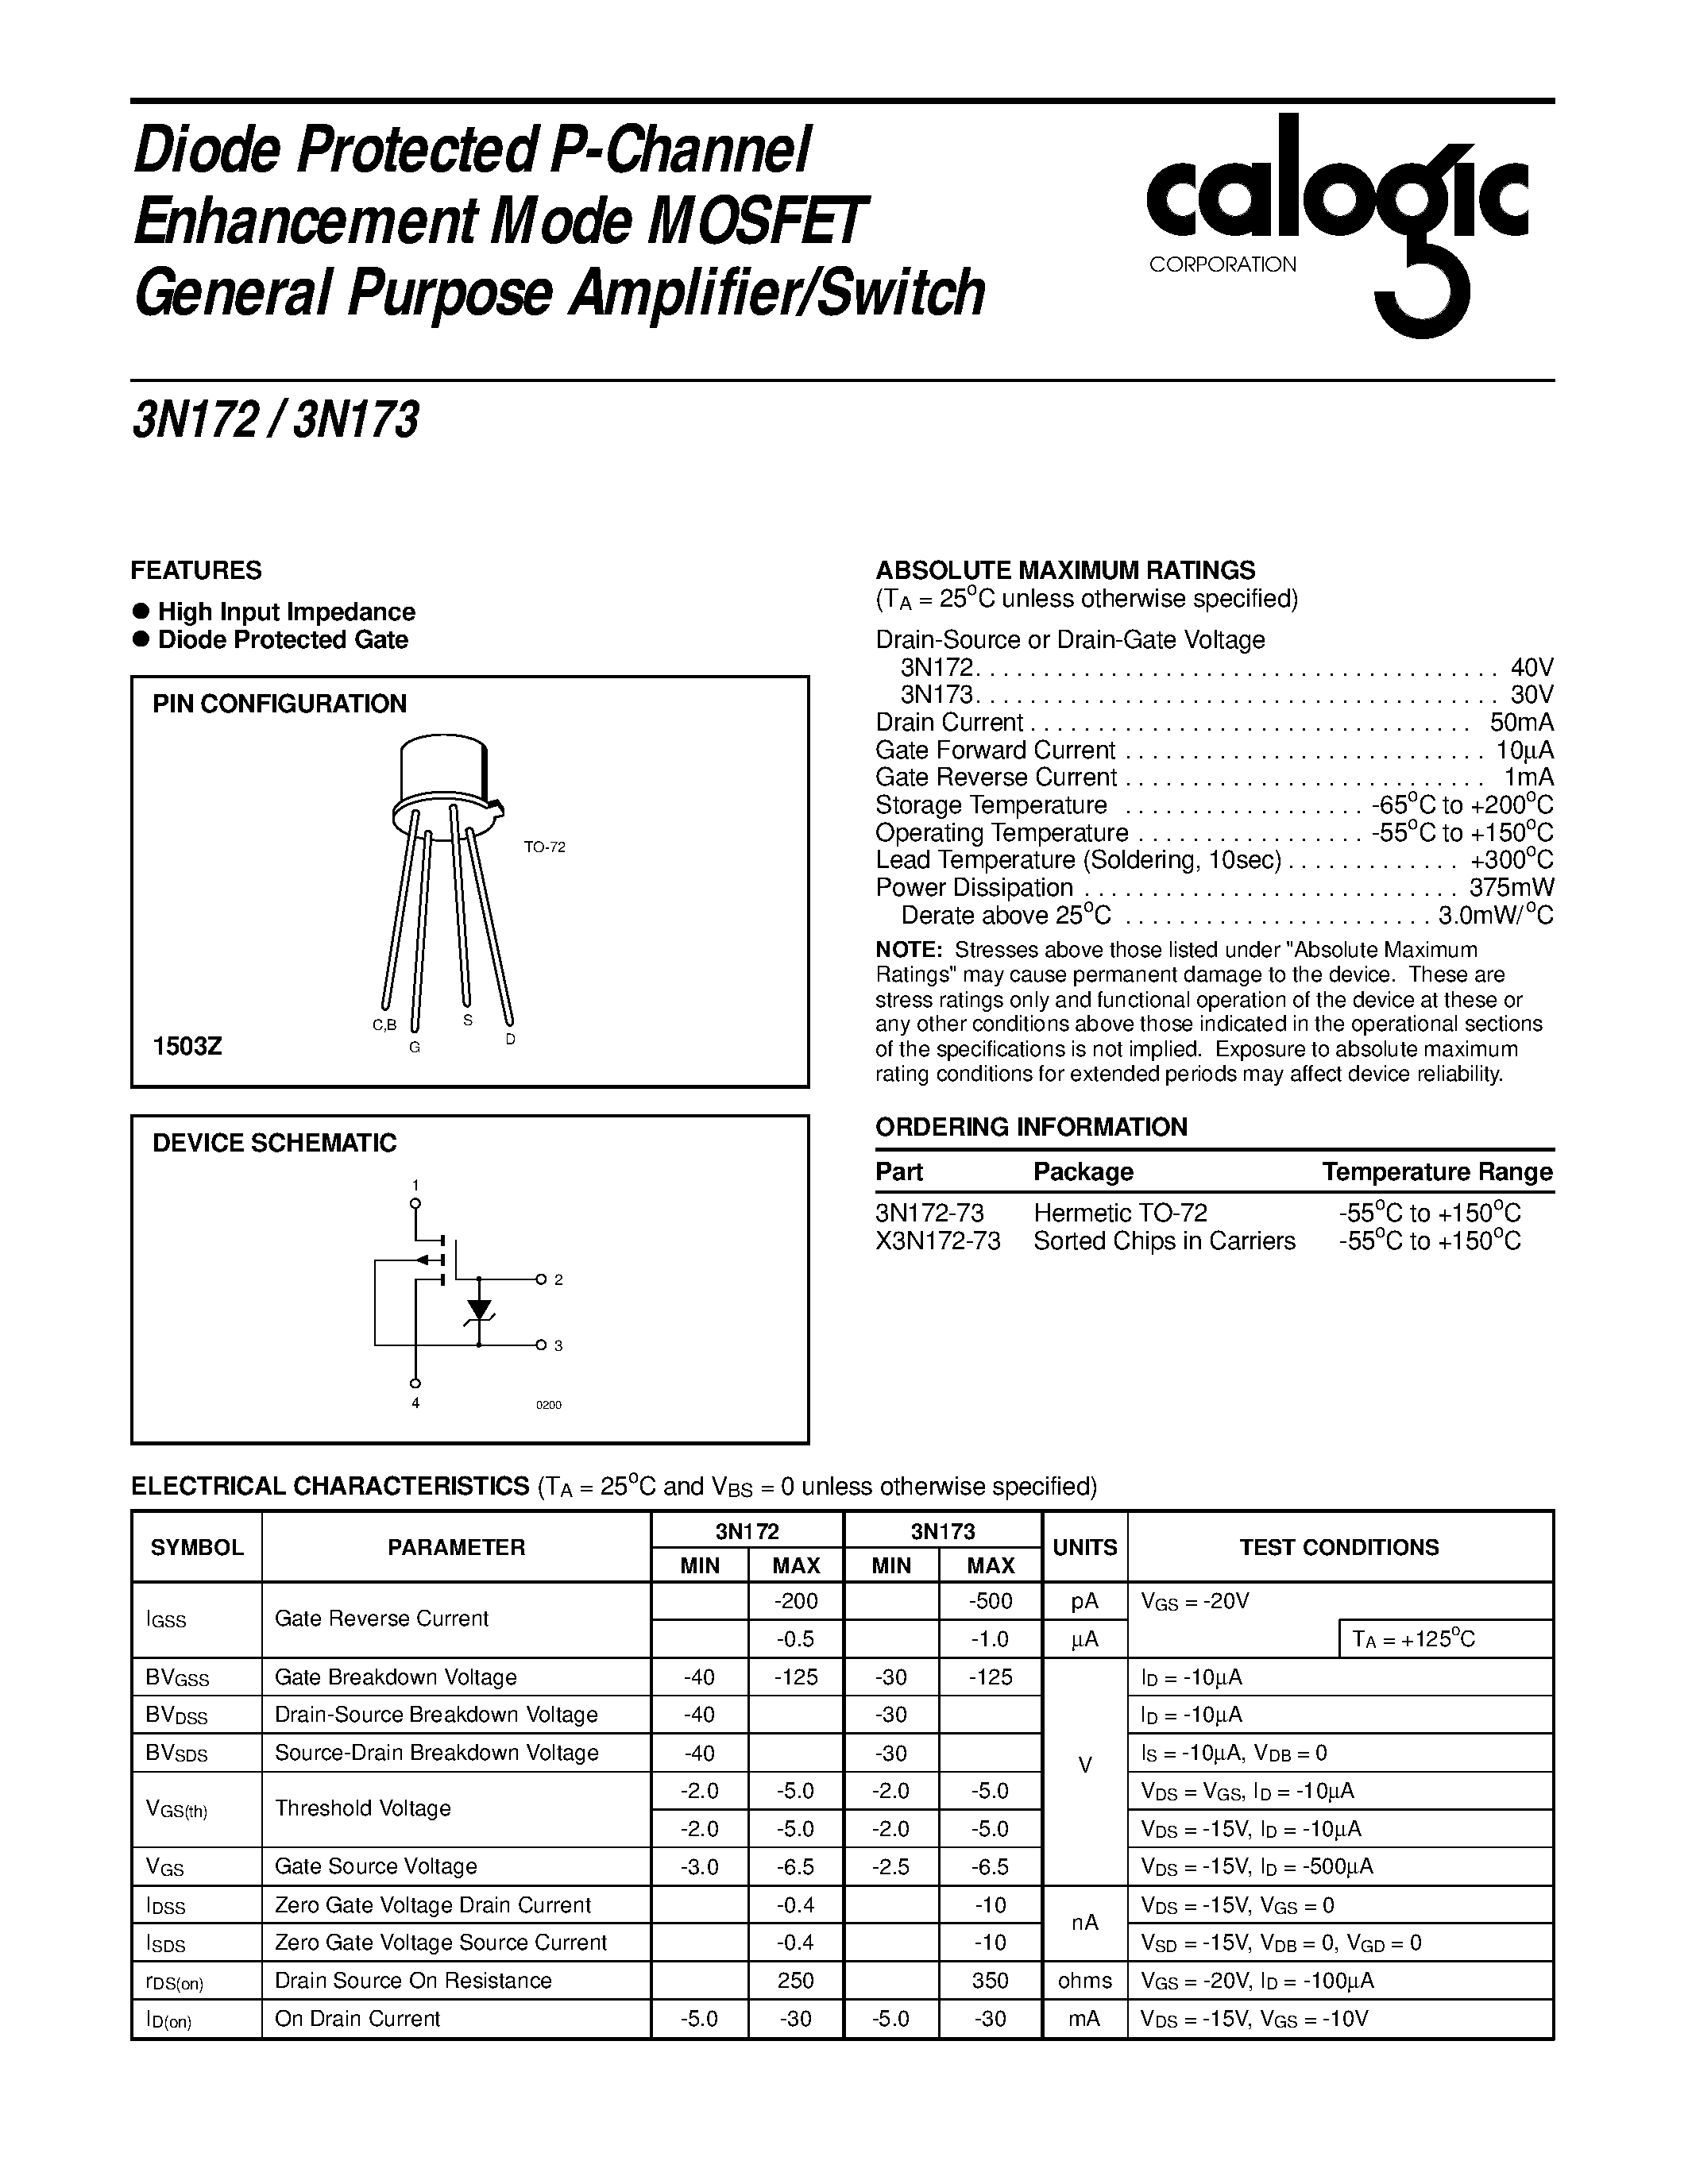 Datasheet X3N172-73 - Diode Protected P-Channel Enhancement Mode MOSFET General Purpose Amplifier/Switch page 1